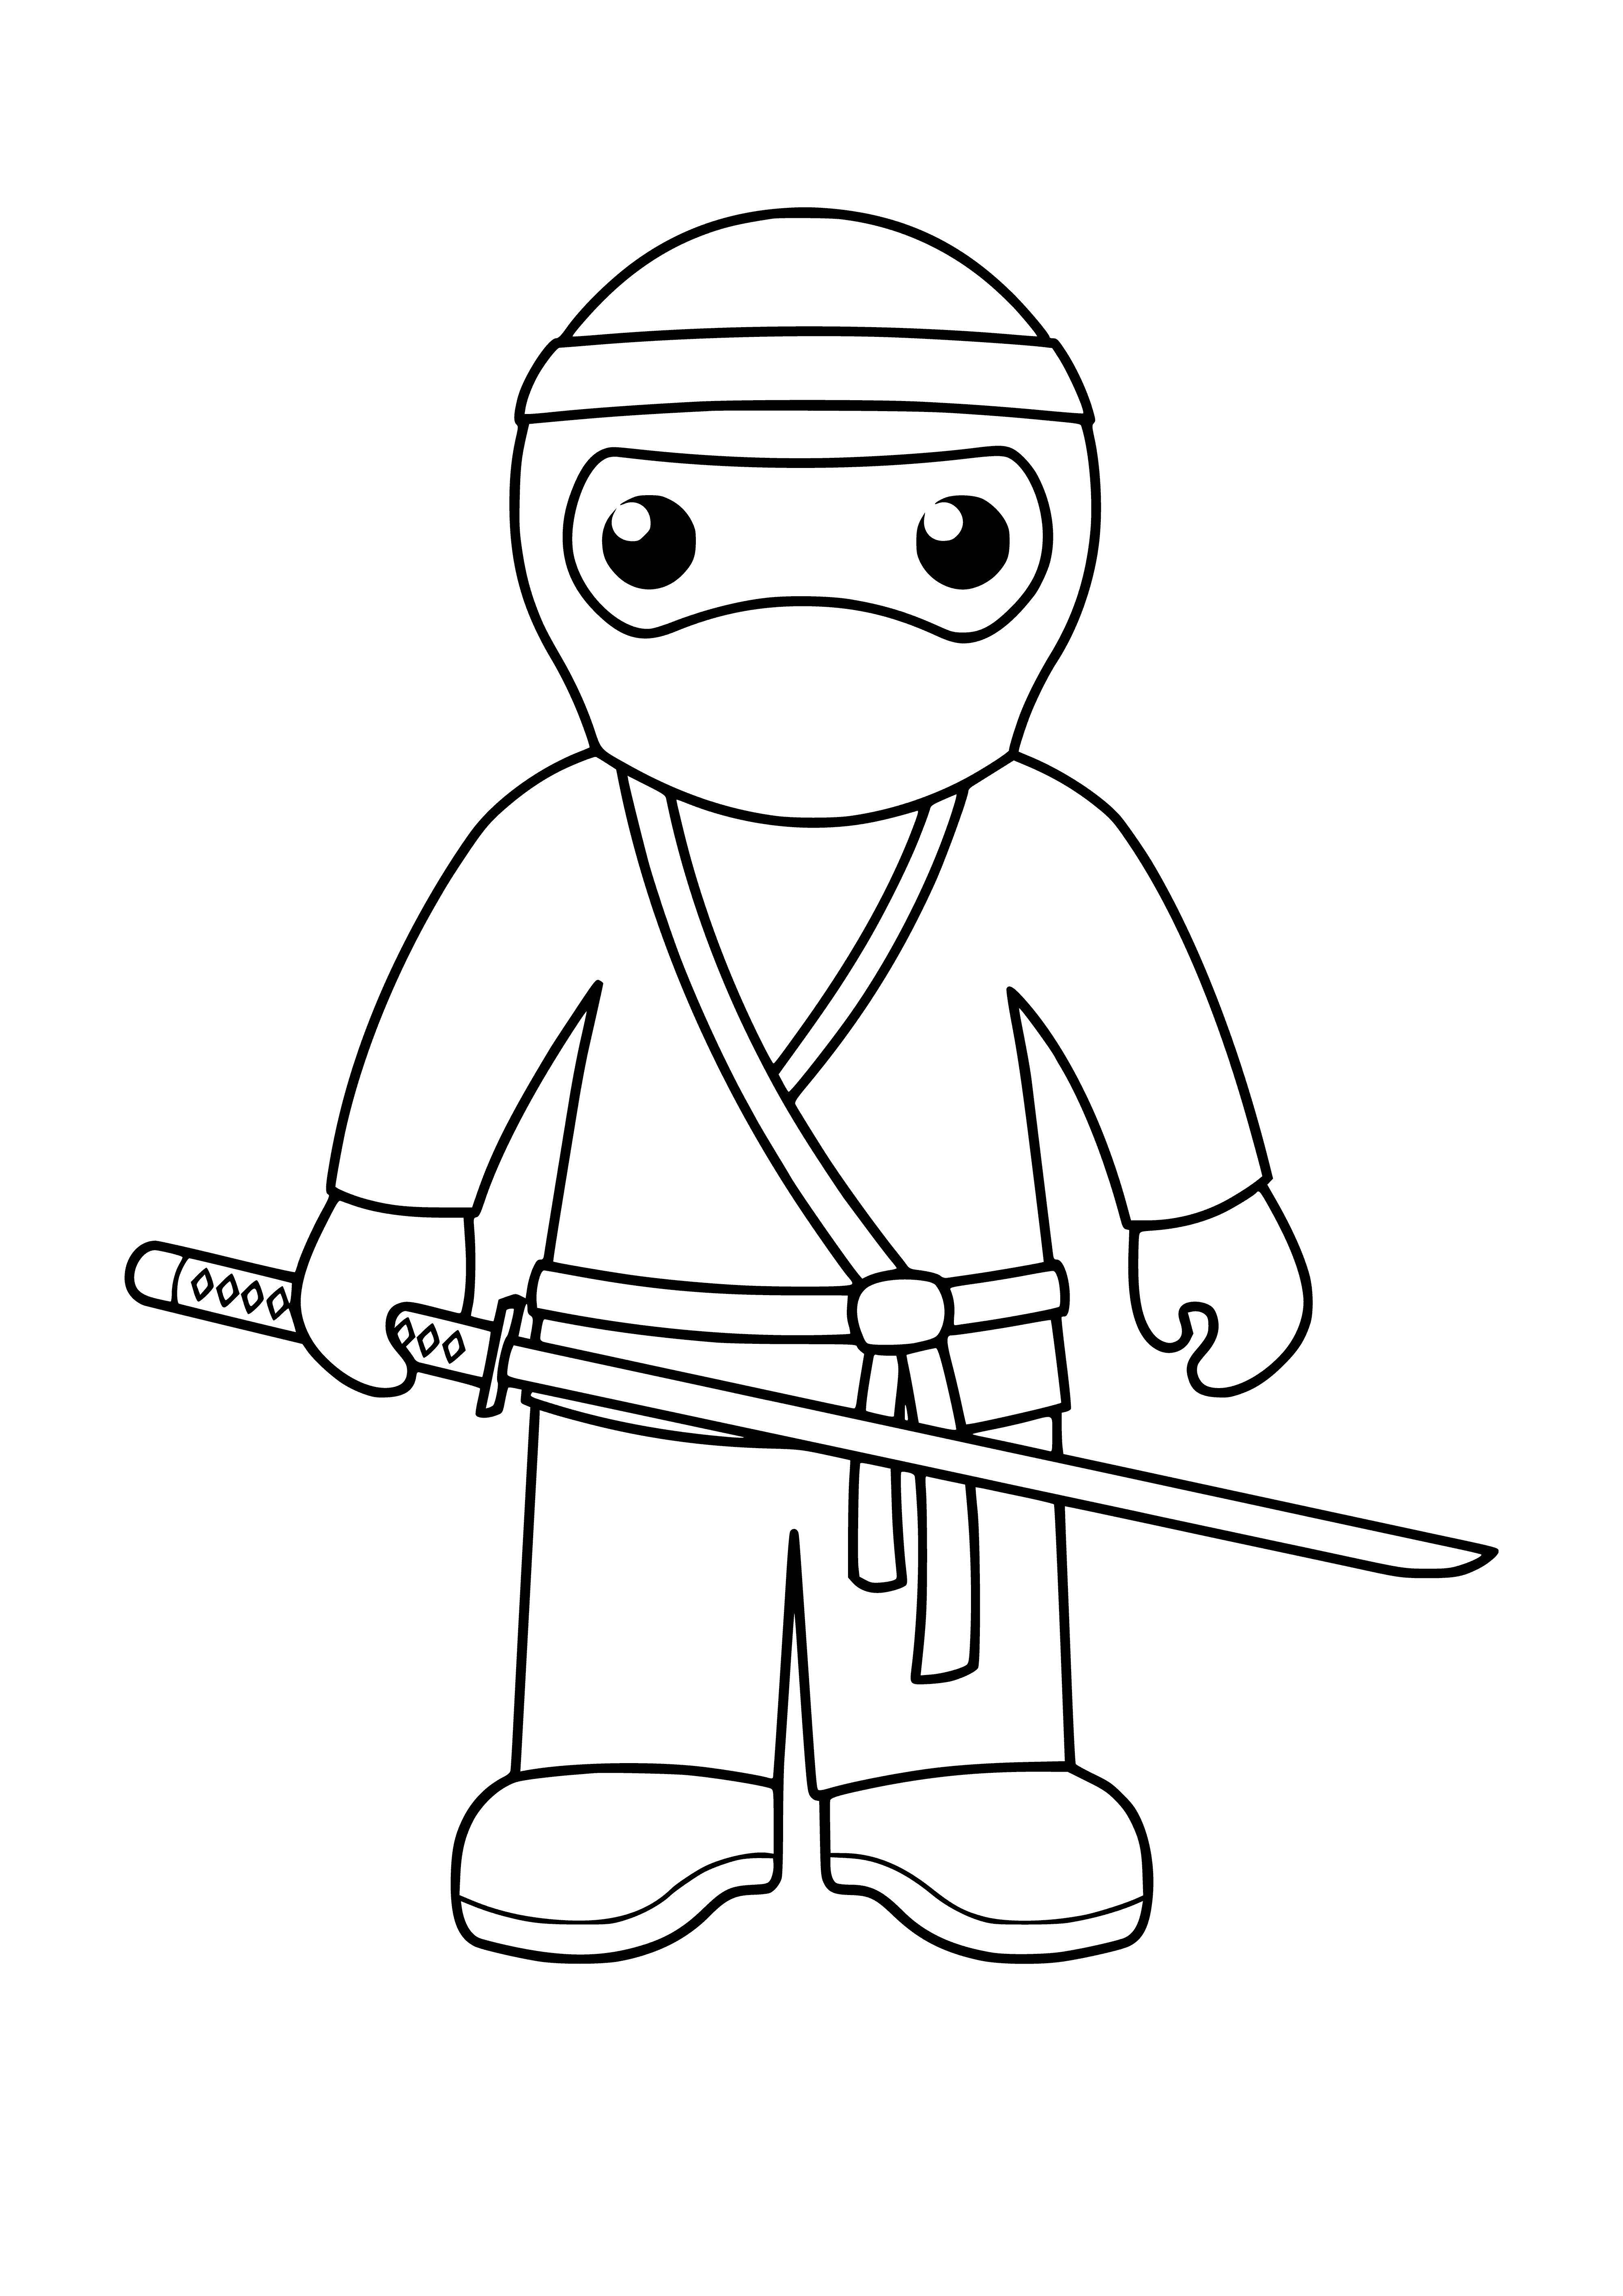 coloring page: 4 people in coloring page; 3 in black with hoods & swords, 4th in red with cape, mask & sword.